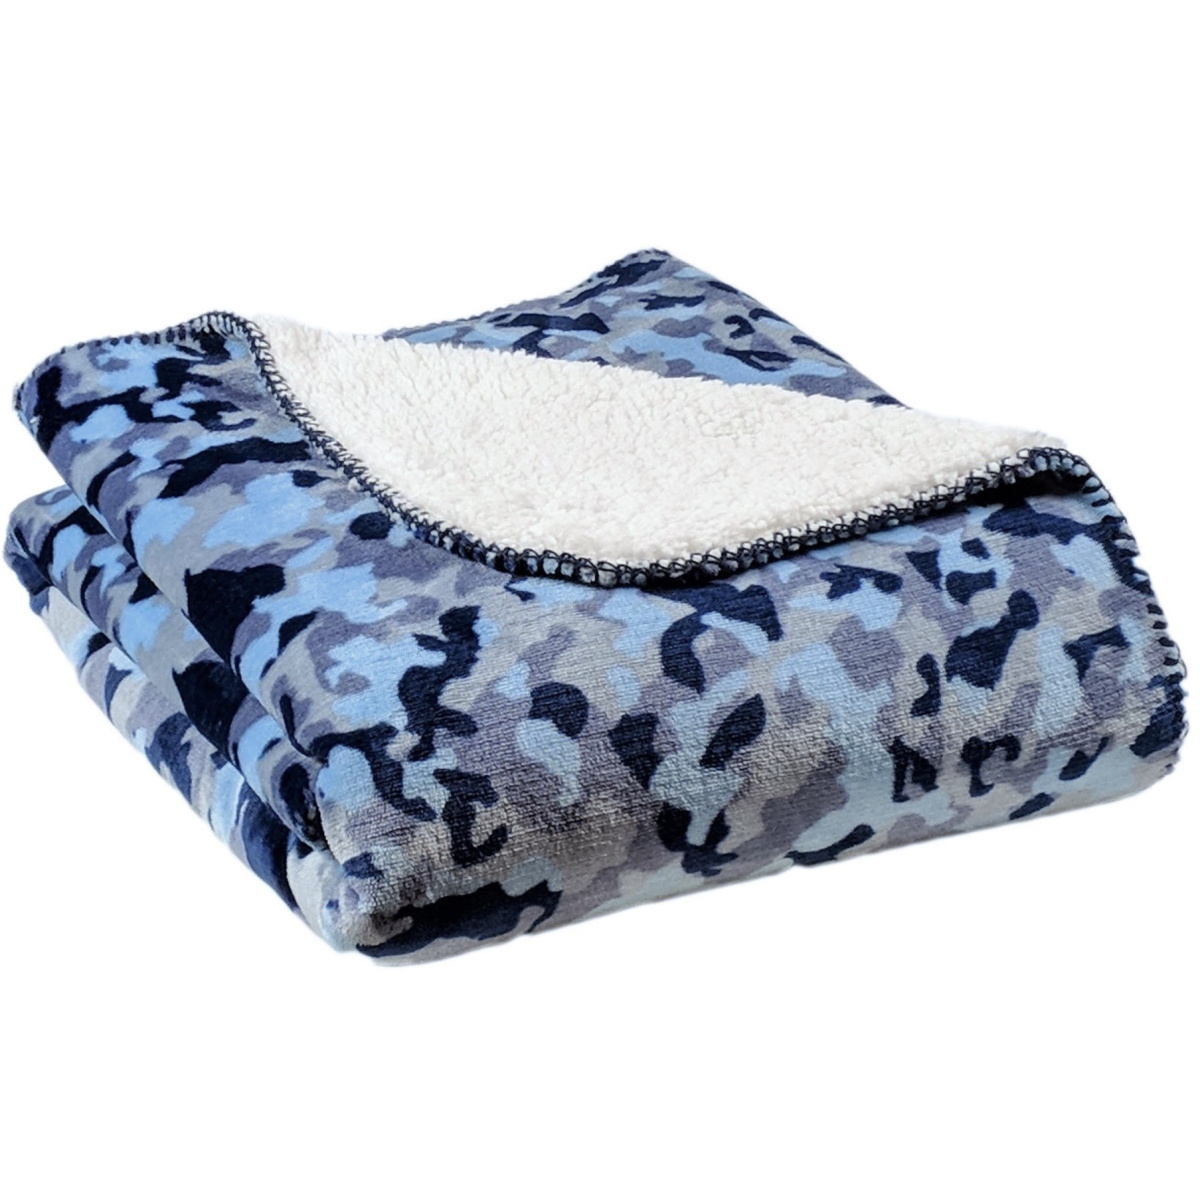 T1708121-sy-cmbl 50 X 60 In. Camo Novelty Printed Velvet Plush To Sherpa Throw - Blue